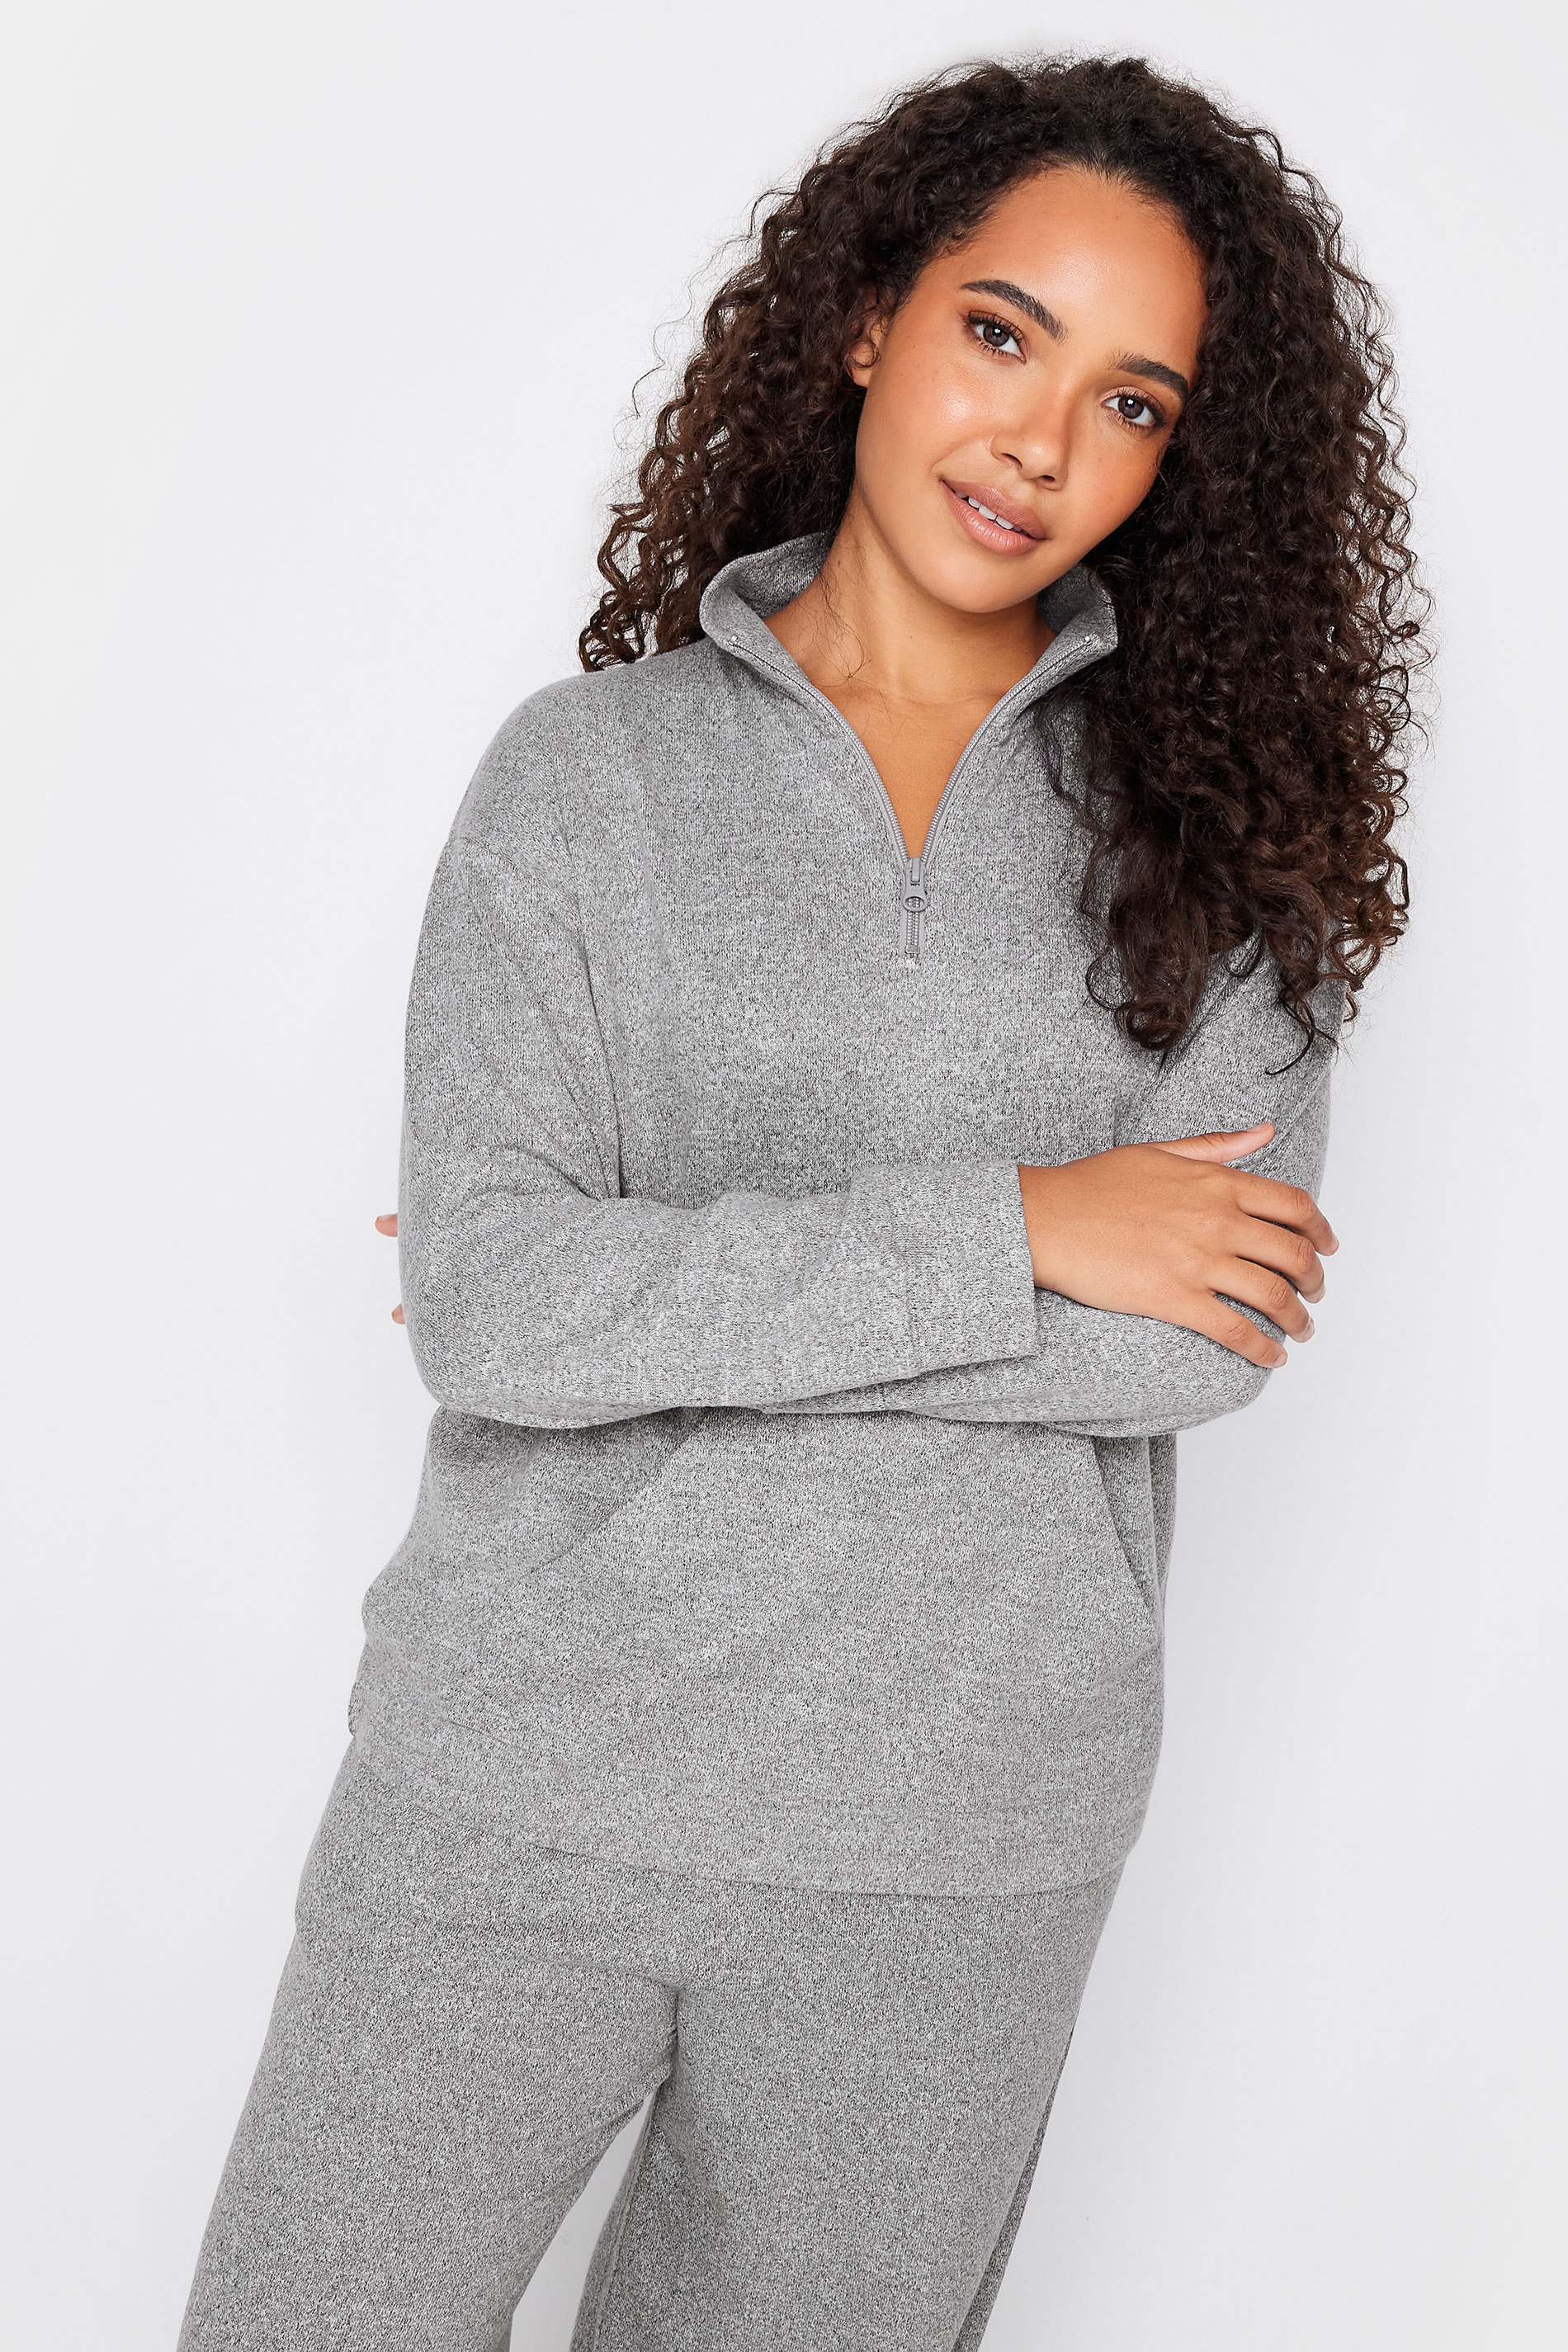 M&Co Grey Soft Touch Zip Lounge Top | M&Co 1